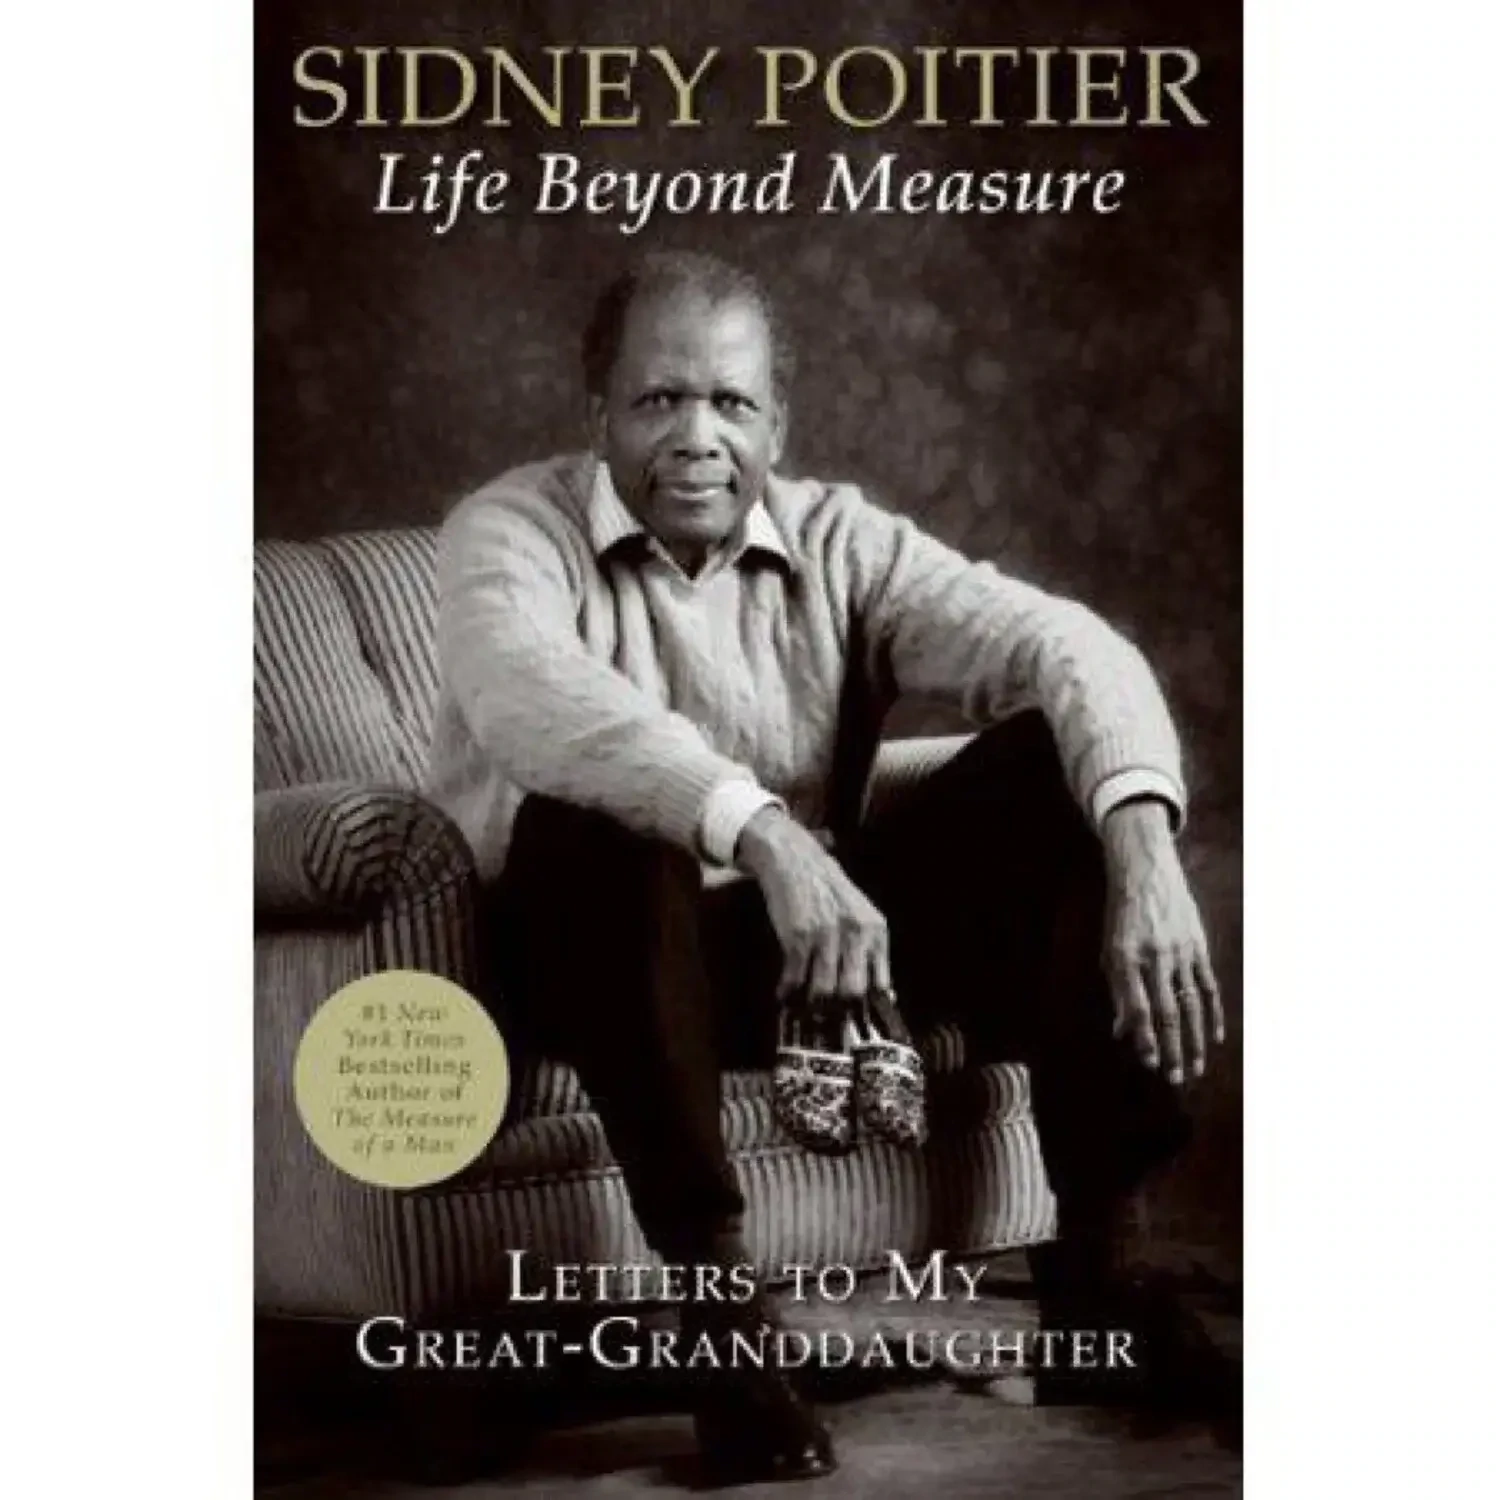 Life Beyond Measure : Letters to My Great-Granddaughter, Sidney Poitier